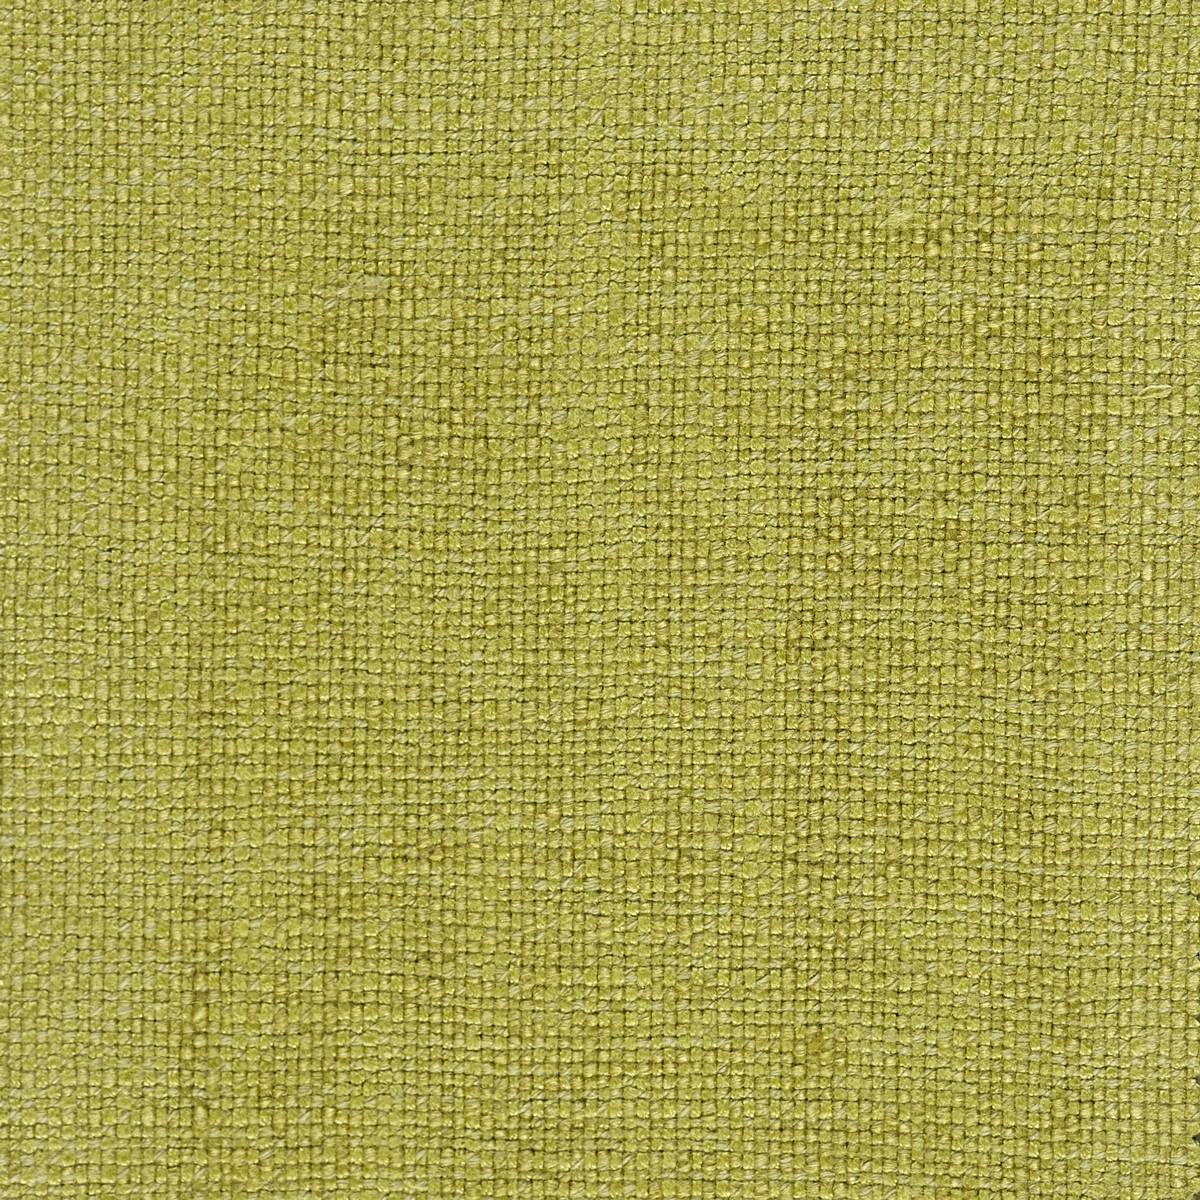 Fission Kiwi Fabric by Harlequin